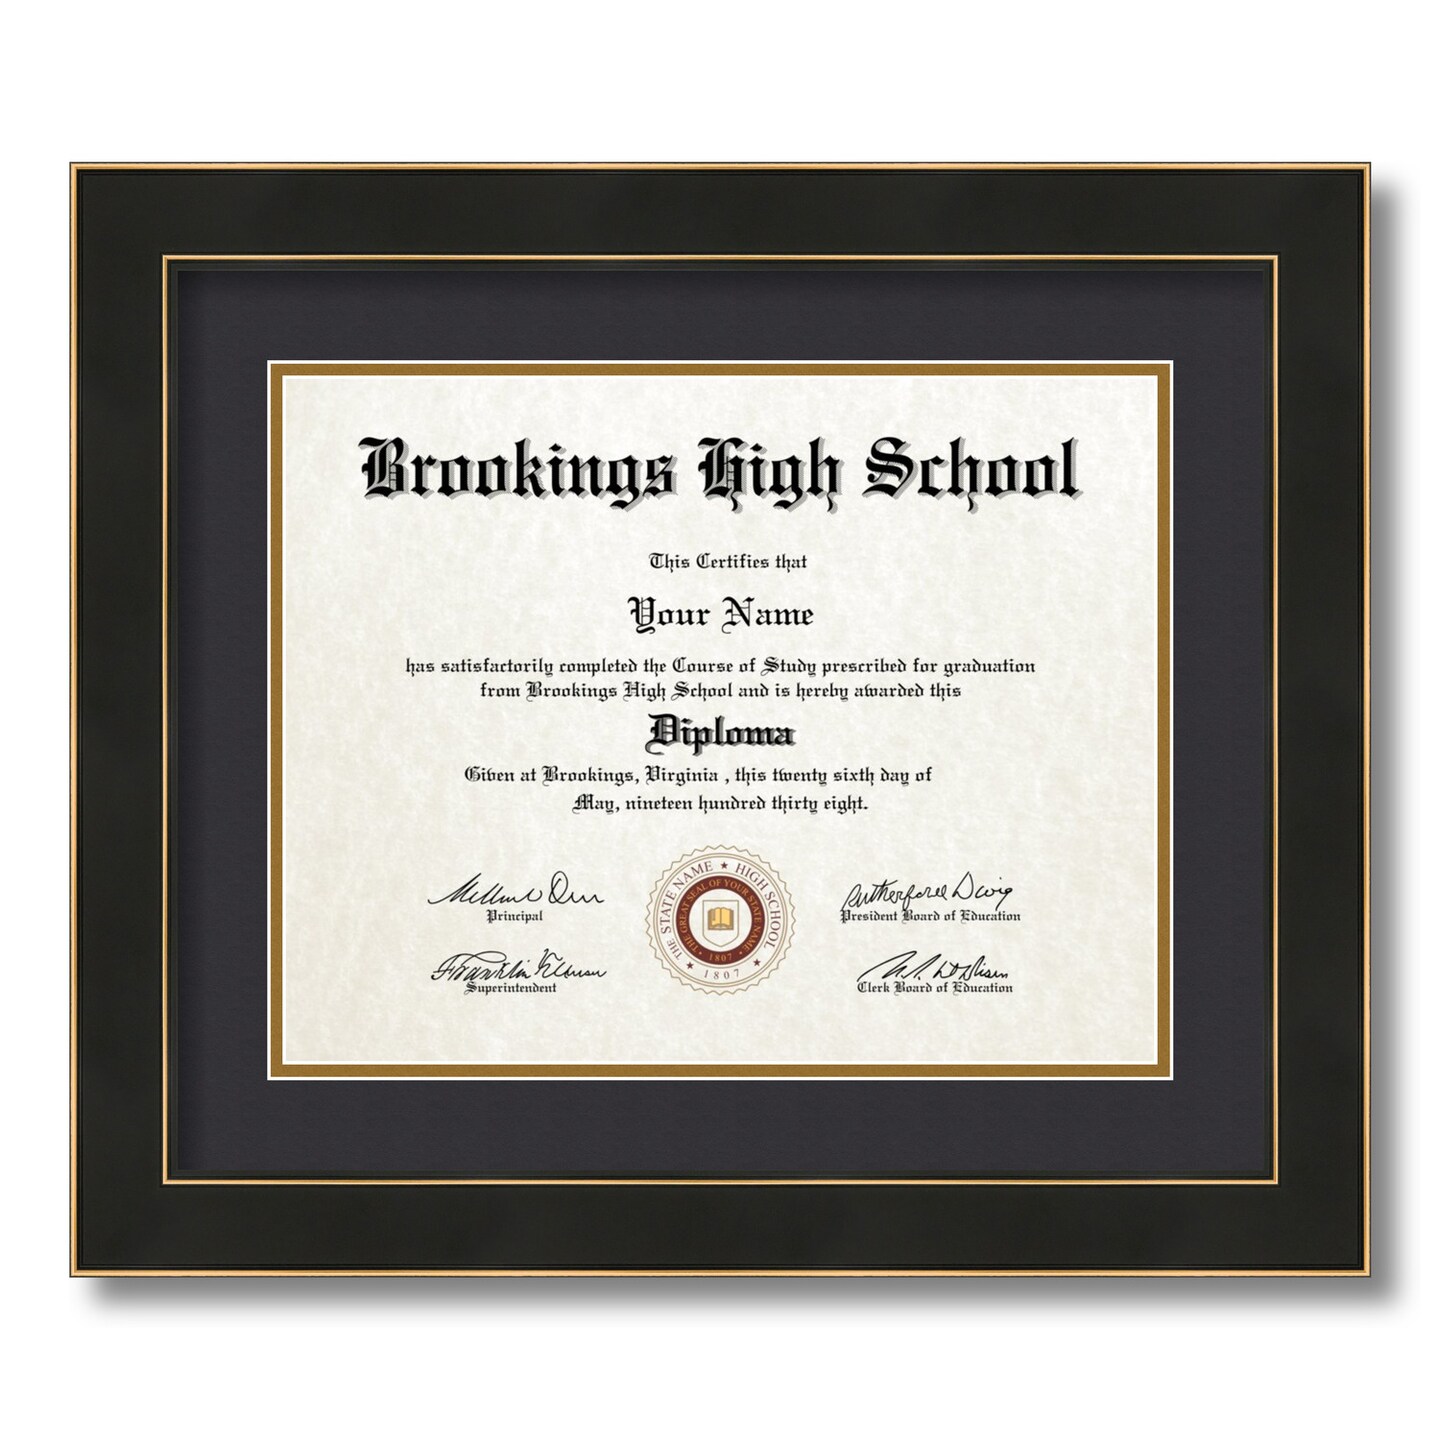 ArtToFrames 11x14 inch Diploma Frame - Framed with Black and Gold Mats, Comes with Regular Glass and Sawtooth Hanger for Wall Hanging (D-11x14)